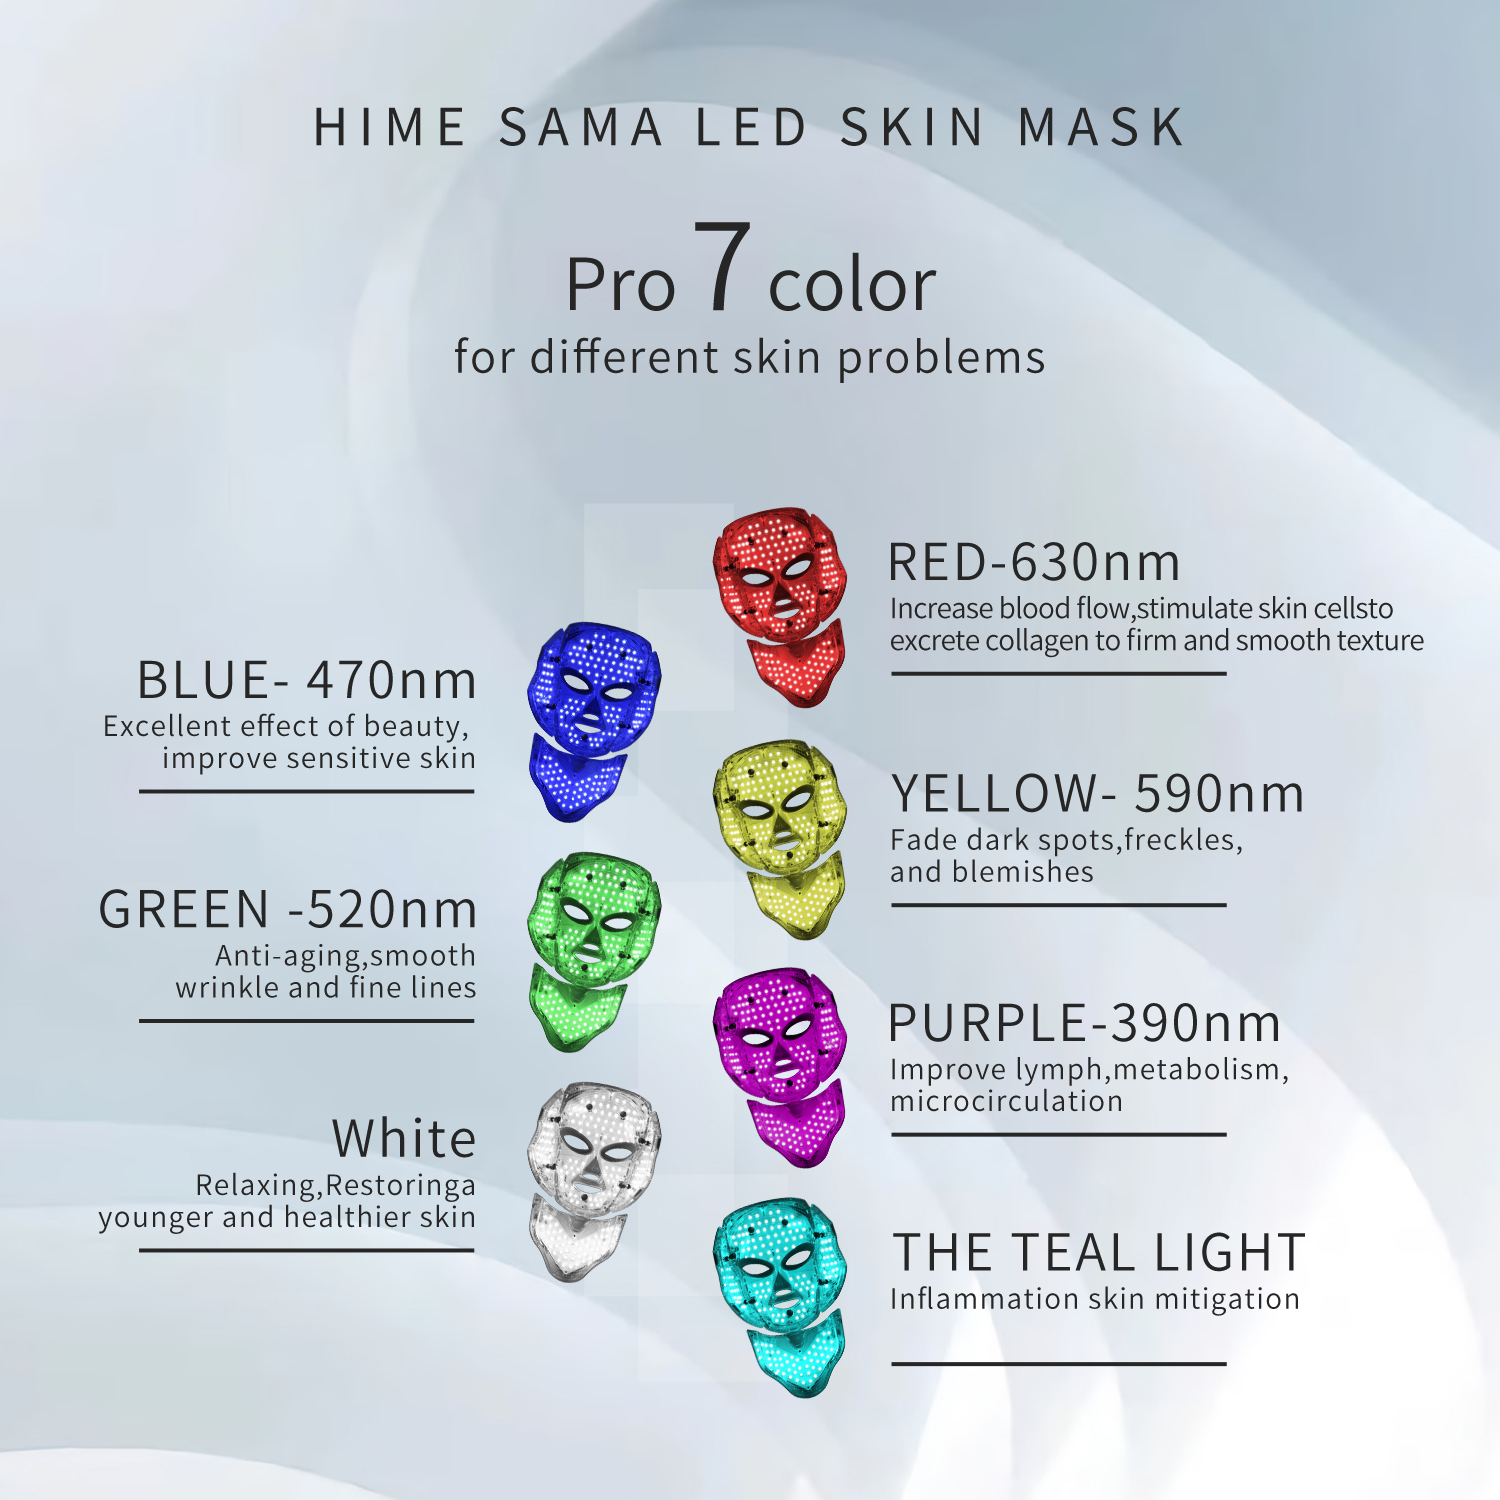 LED Skin Mask-CE Cleared Pro 7 LED Skin Care Mask for Face and Neck Skin Rejuvenation Light Therapy Facial Care Mask and Optical Cosmetic Mask Portable for Home and Travel Use - image 5 of 7